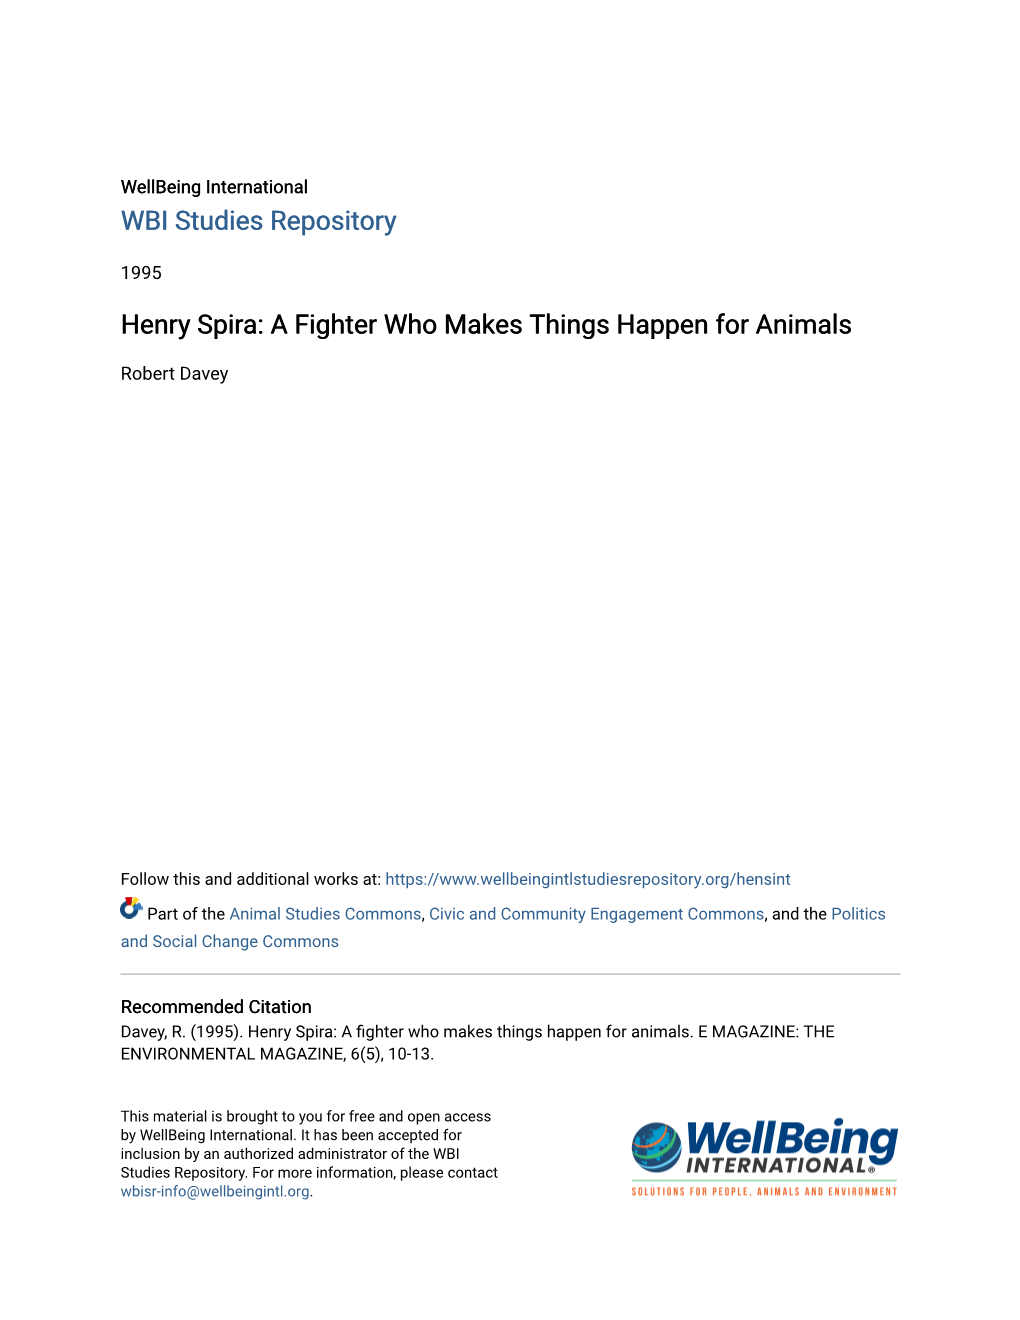 Henry Spira: a Fighter Who Makes Things Happen for Animals